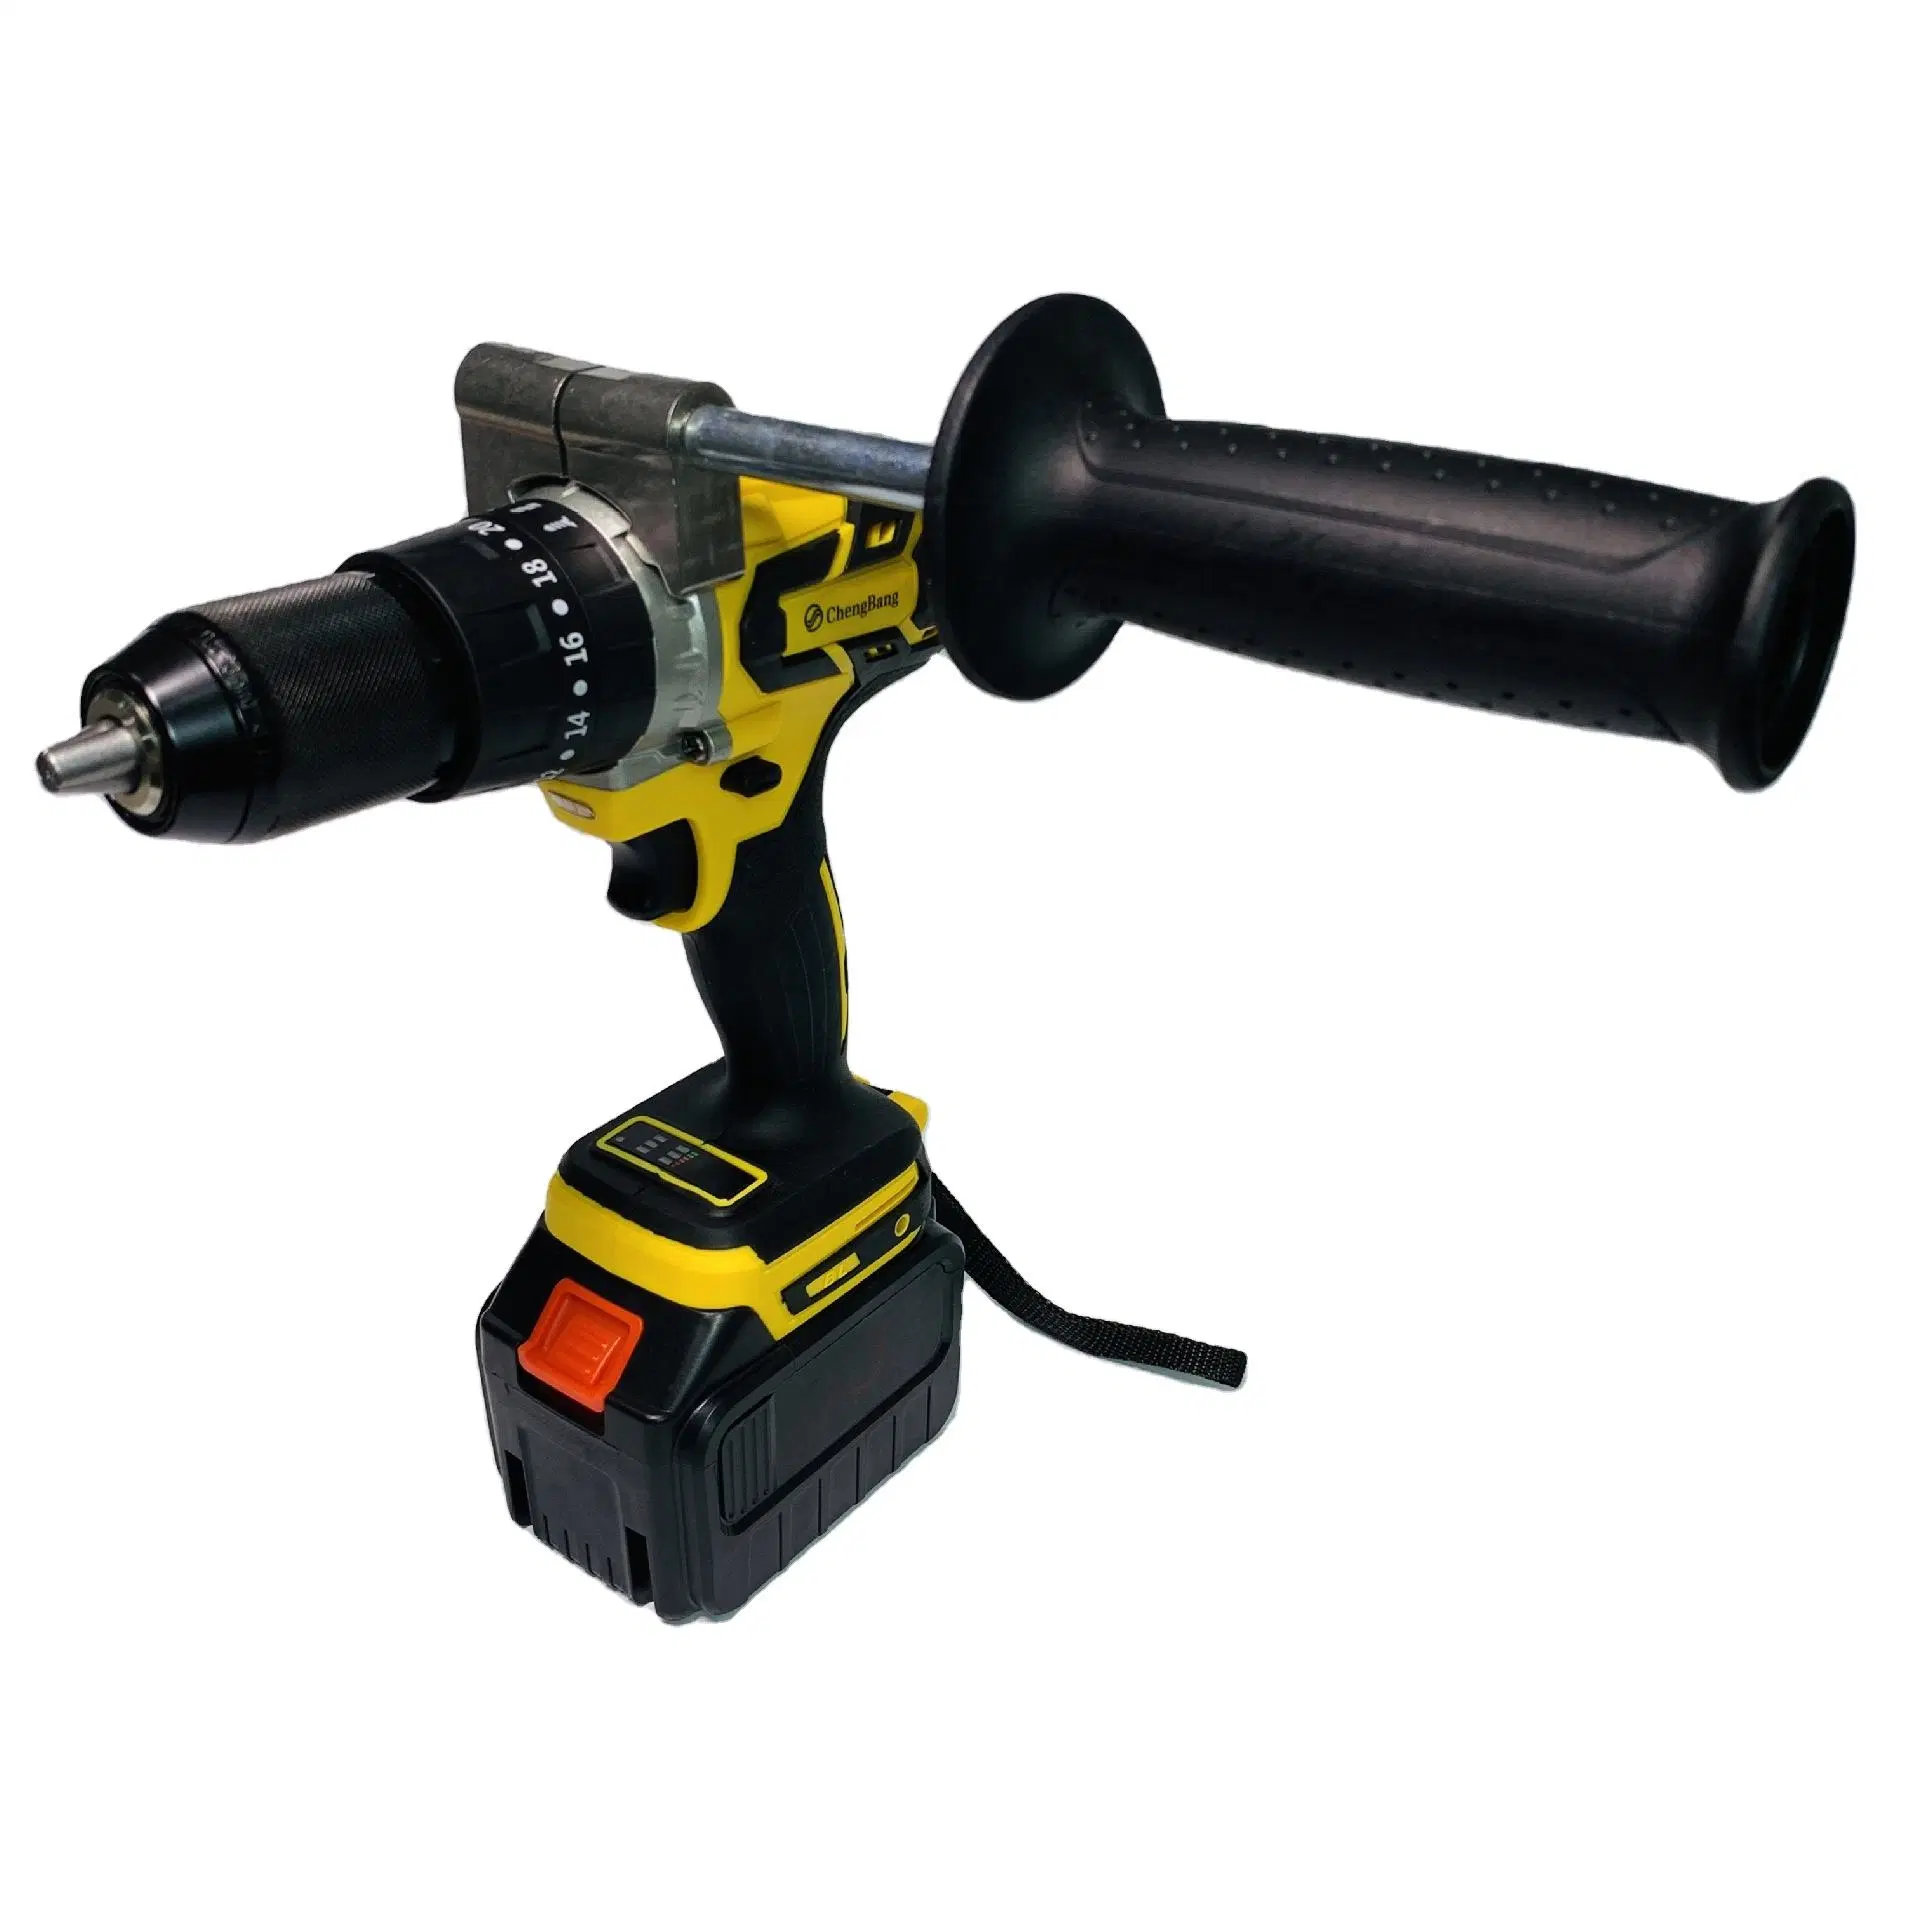 Yellow High Power Lithium Brushless Impact Drill Rechargeable Cordless Electric Hand